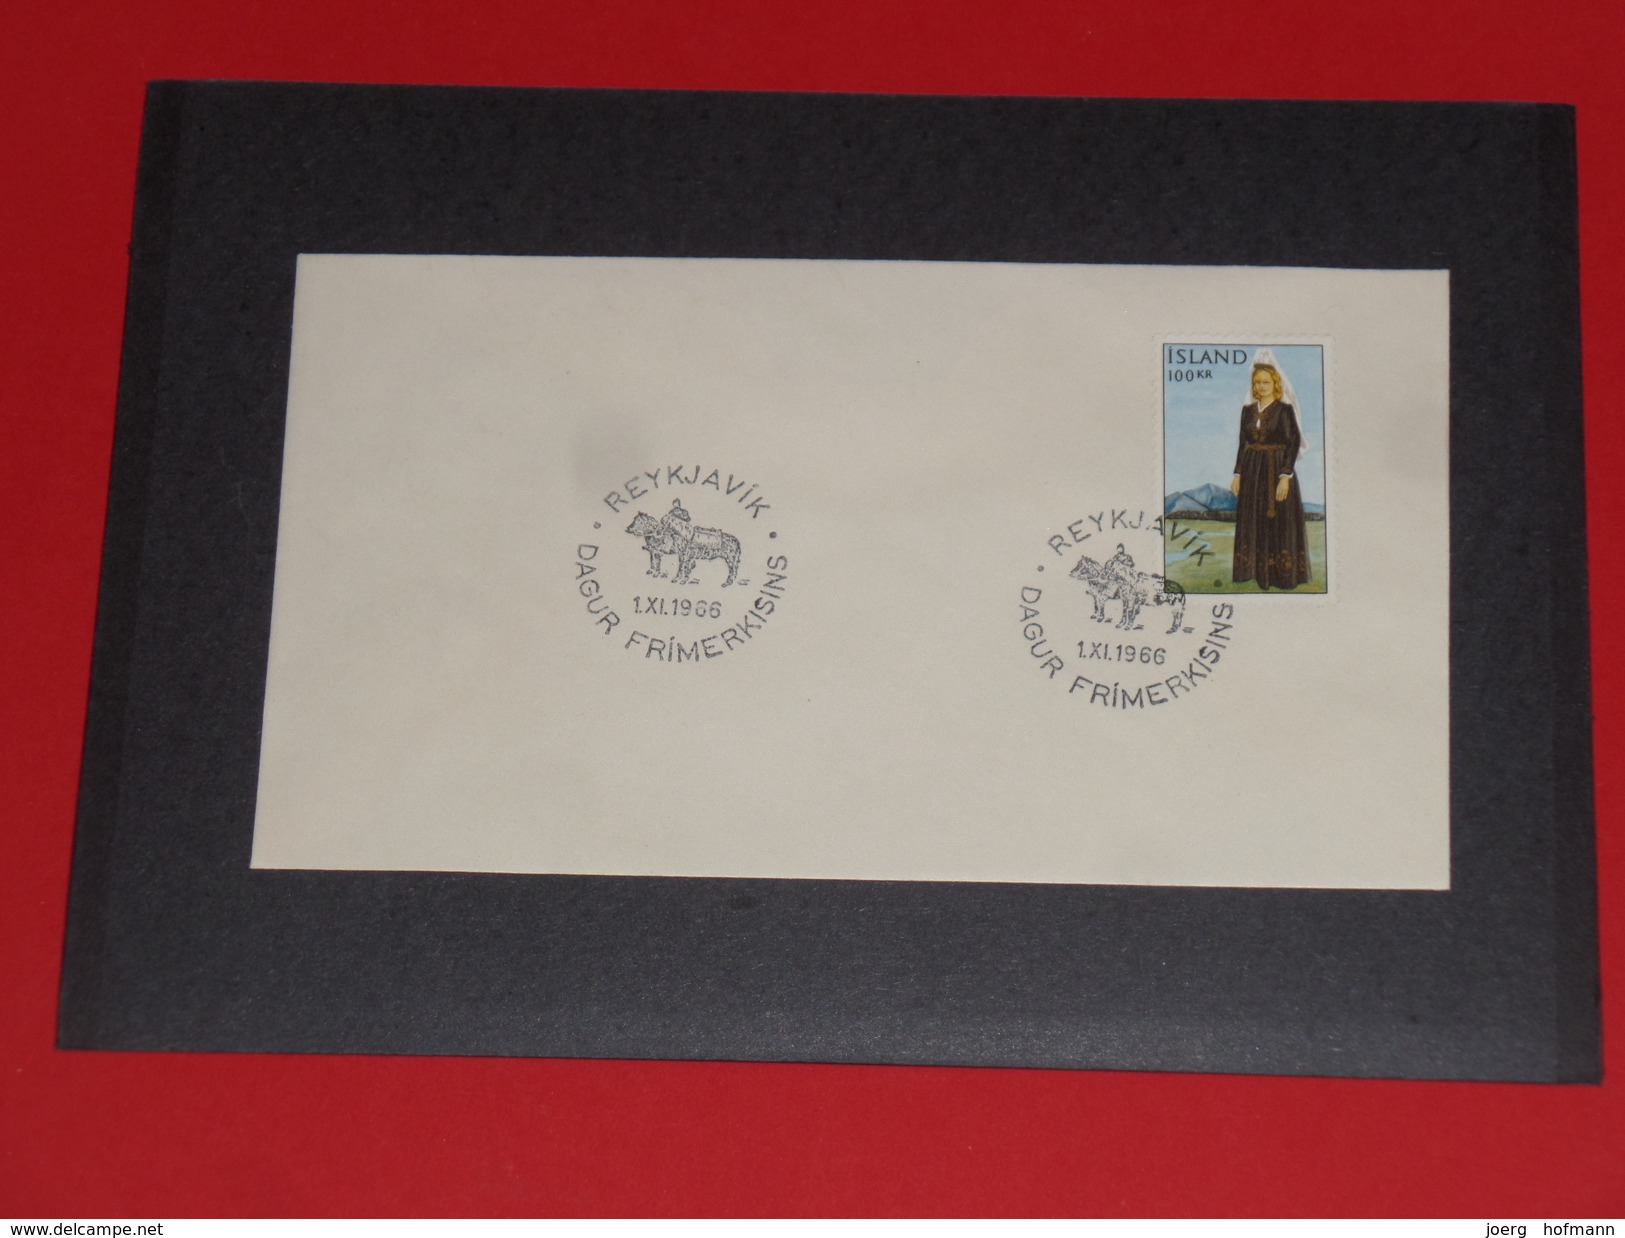 Island Iceland FDC Tracht Trachten 1966 Reykjavik - Covers & Documents